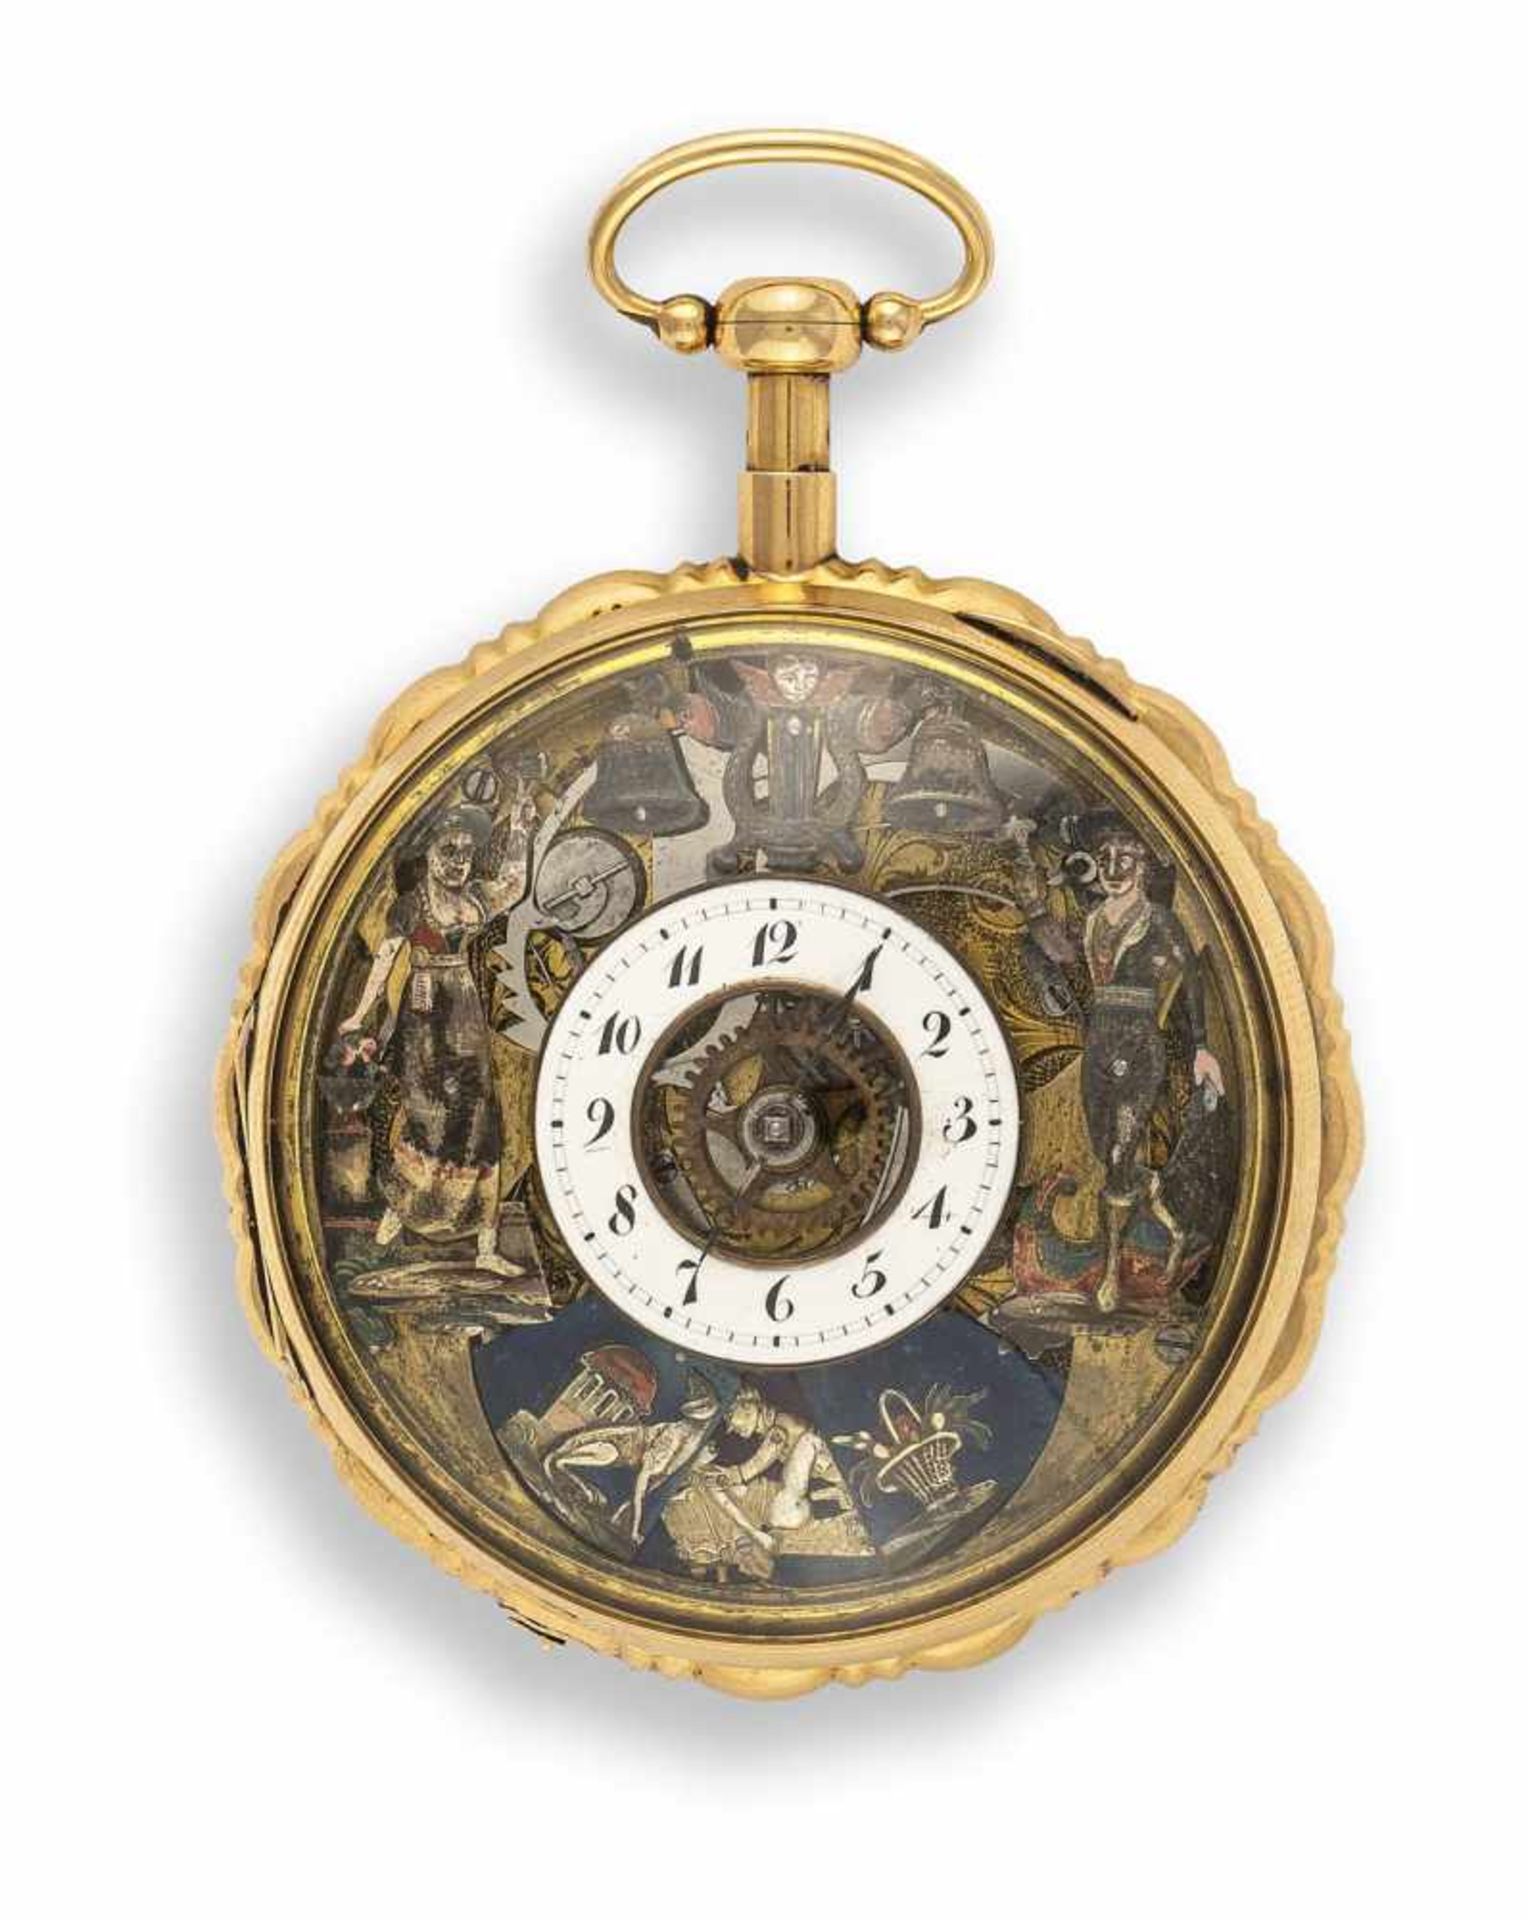 A fine gold pocket watch with figural automat of a very high quality, inscribed Breguet et fils,